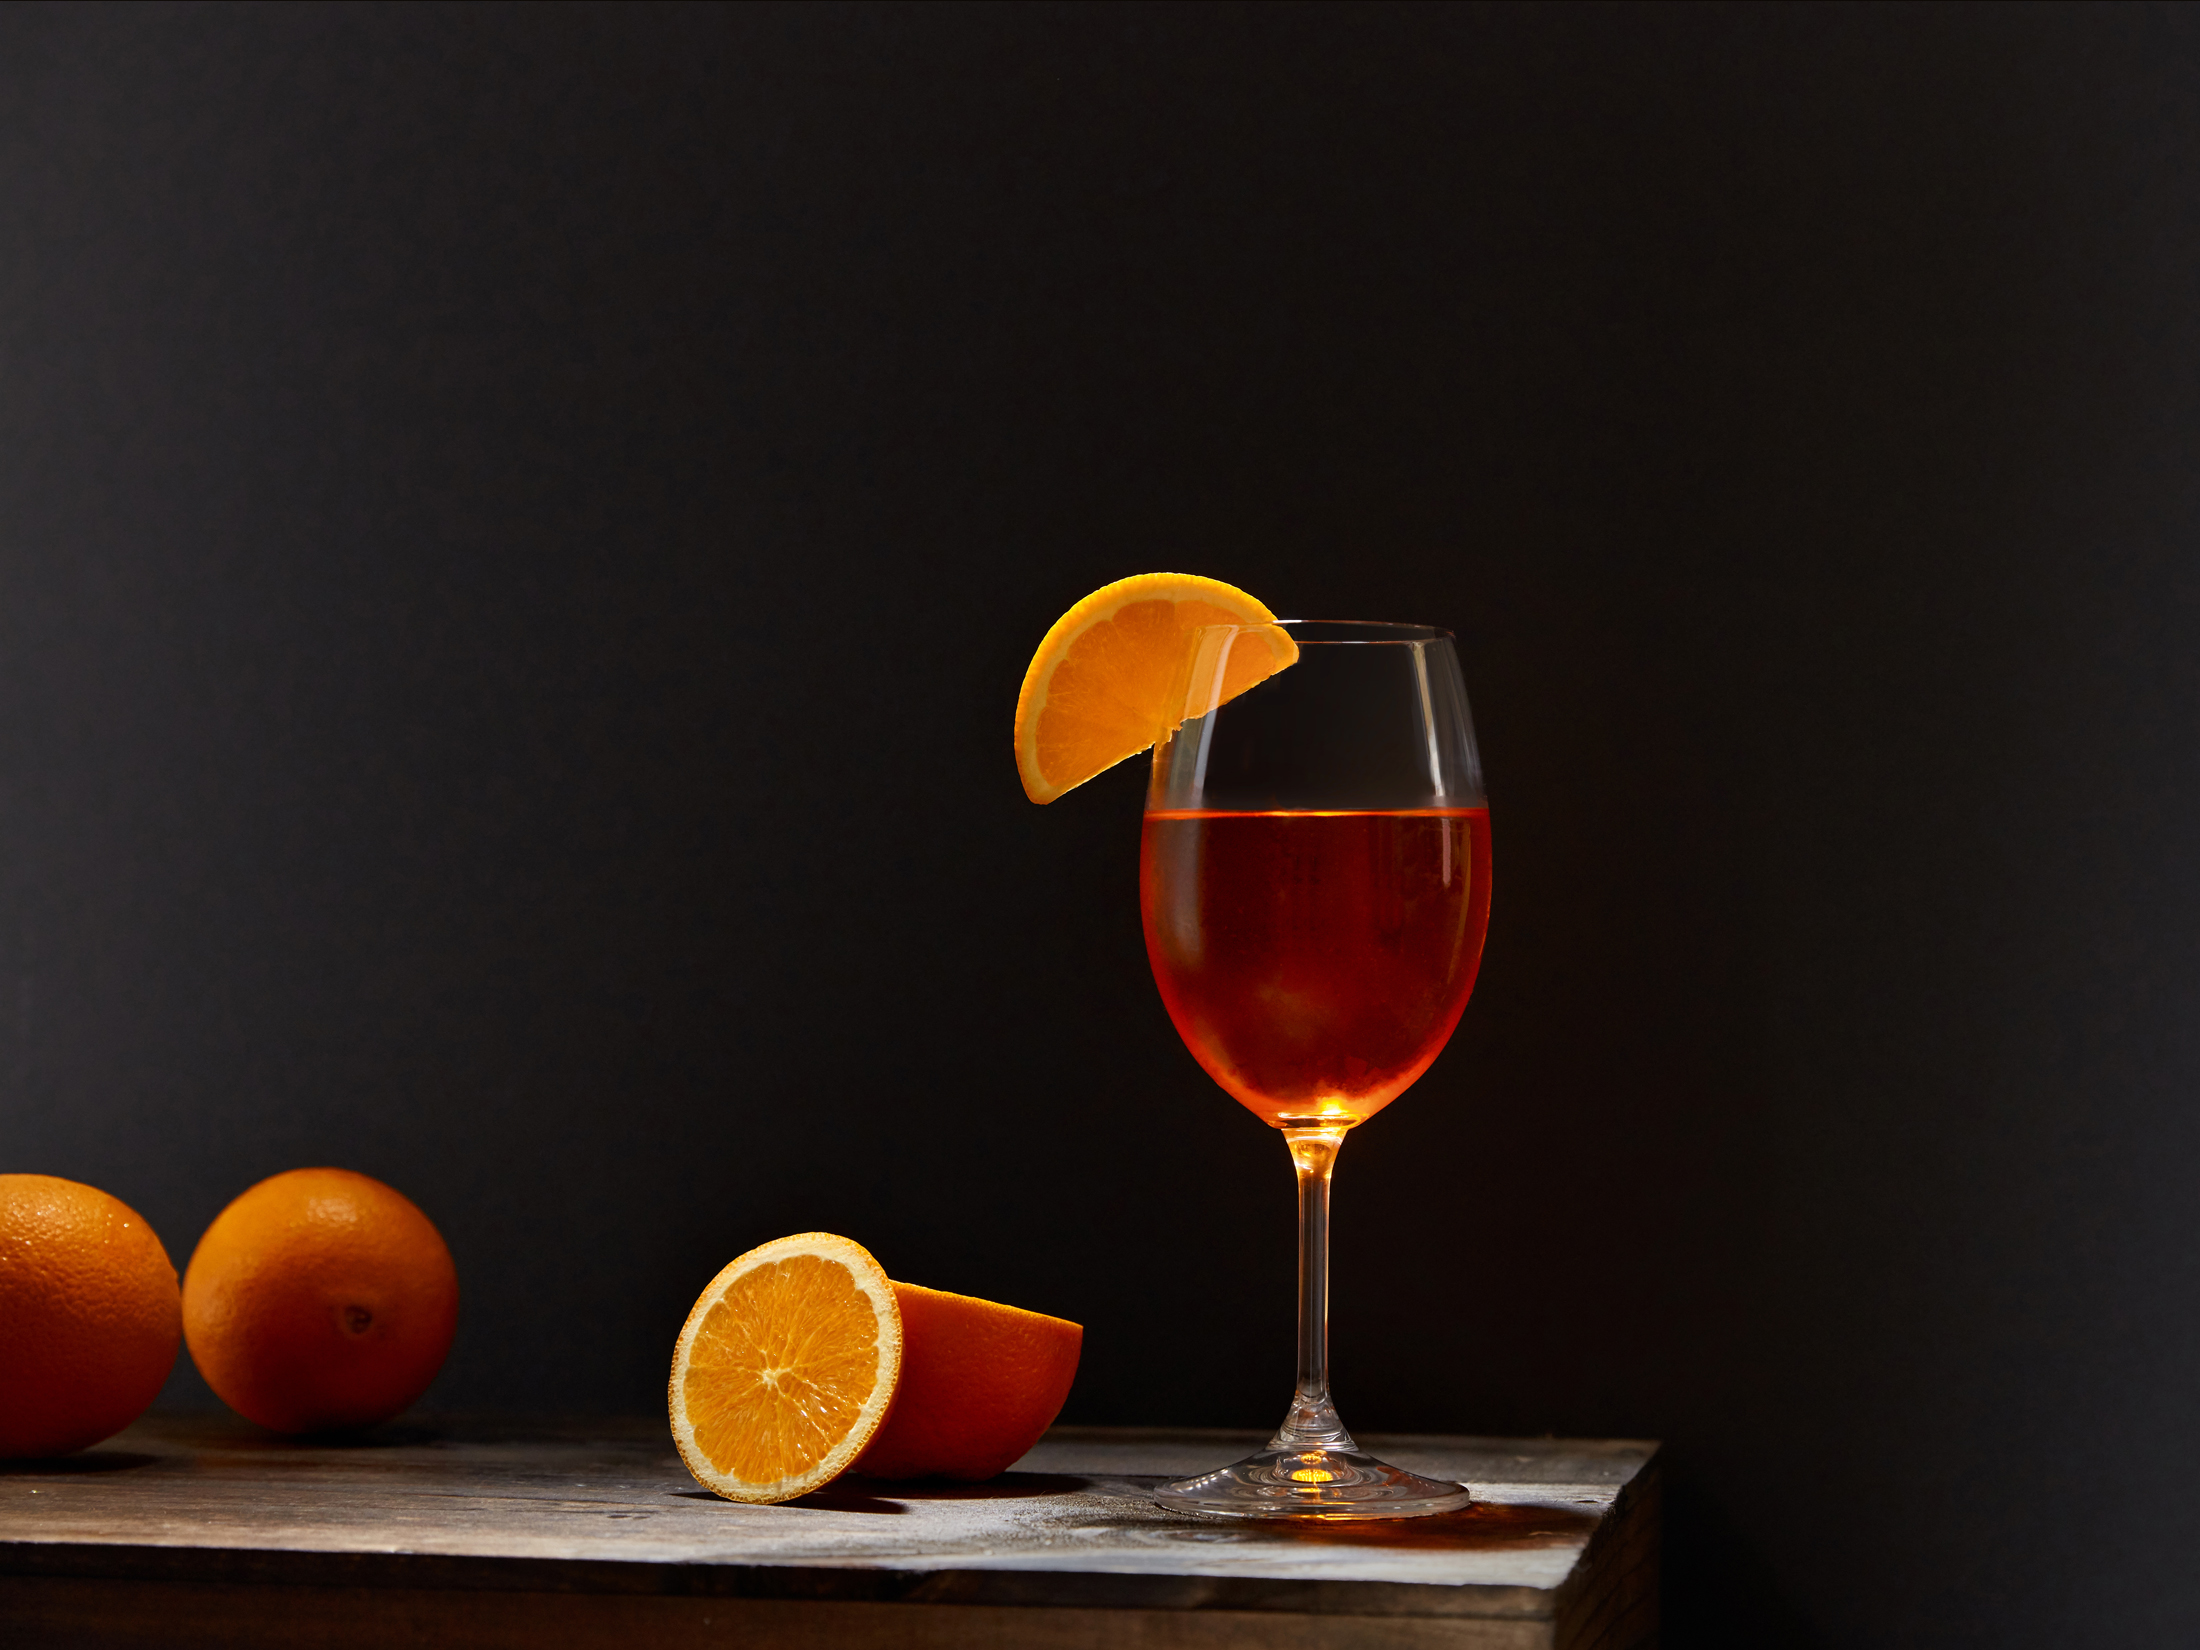 Oranges and drink on wooden table photographed by professional food and beverage photographer Kate Benson.